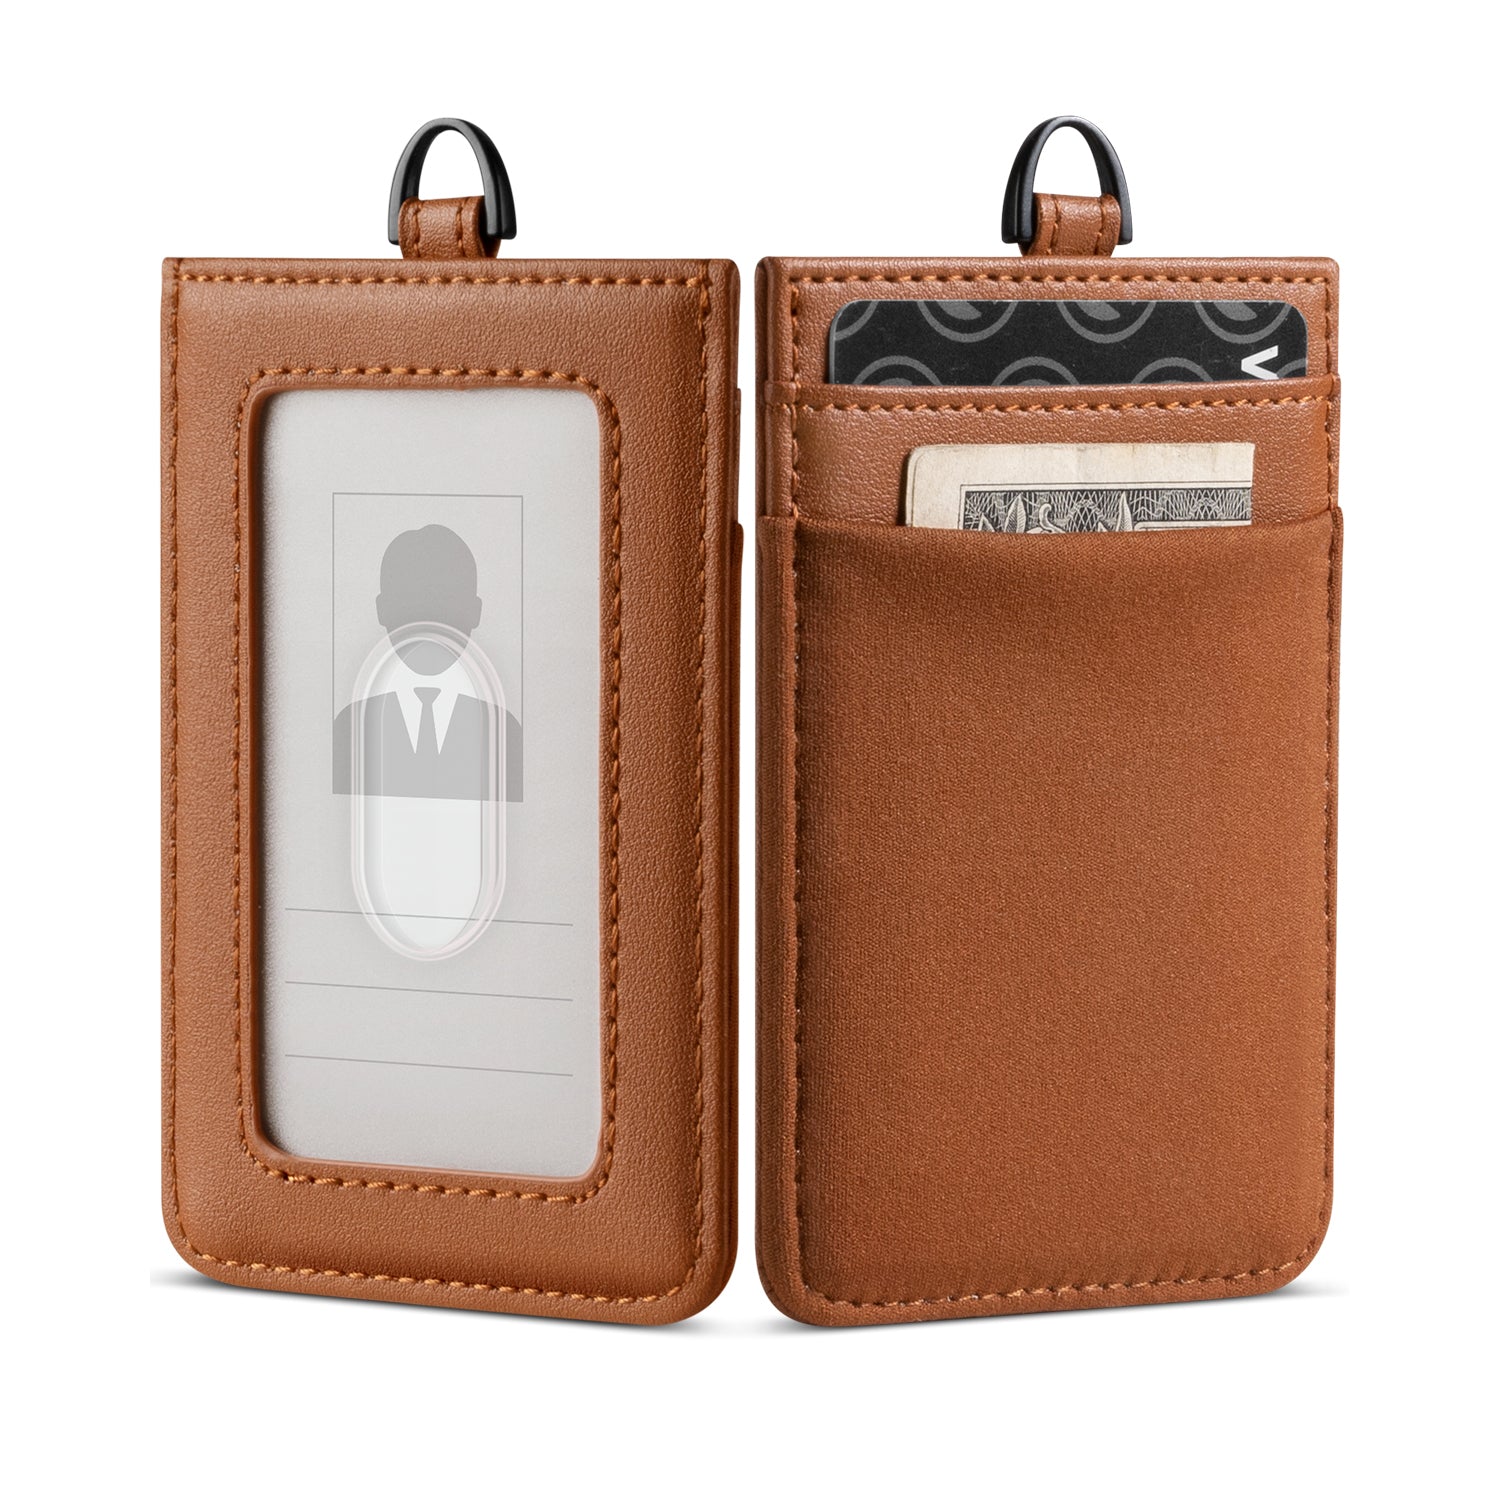 Badge Holder with Zipper, PU Leather ID Badge Card Holder Wallet